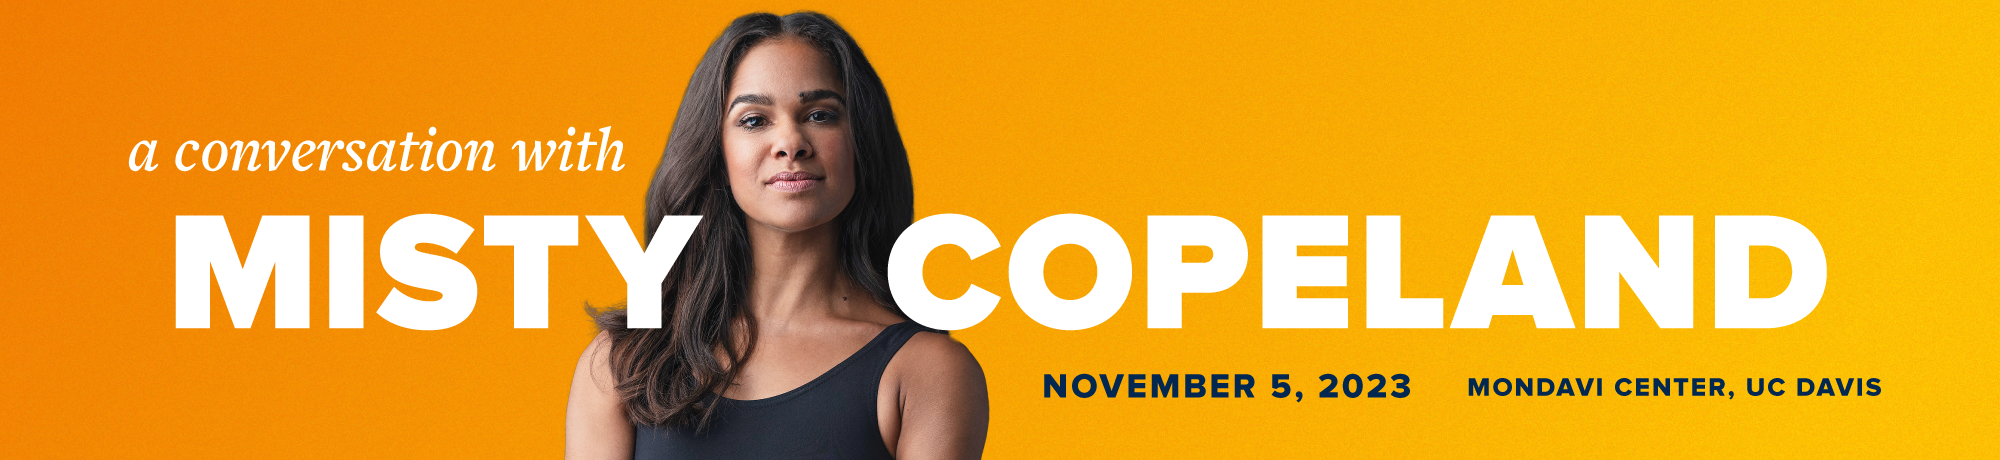 A Conversation with Misty Copeland on November 5, 2023 at Mondavi Center, UC Davis. Misty's headshot in a black leotard is in the middle of the banner against a yellow and orange gradient background.